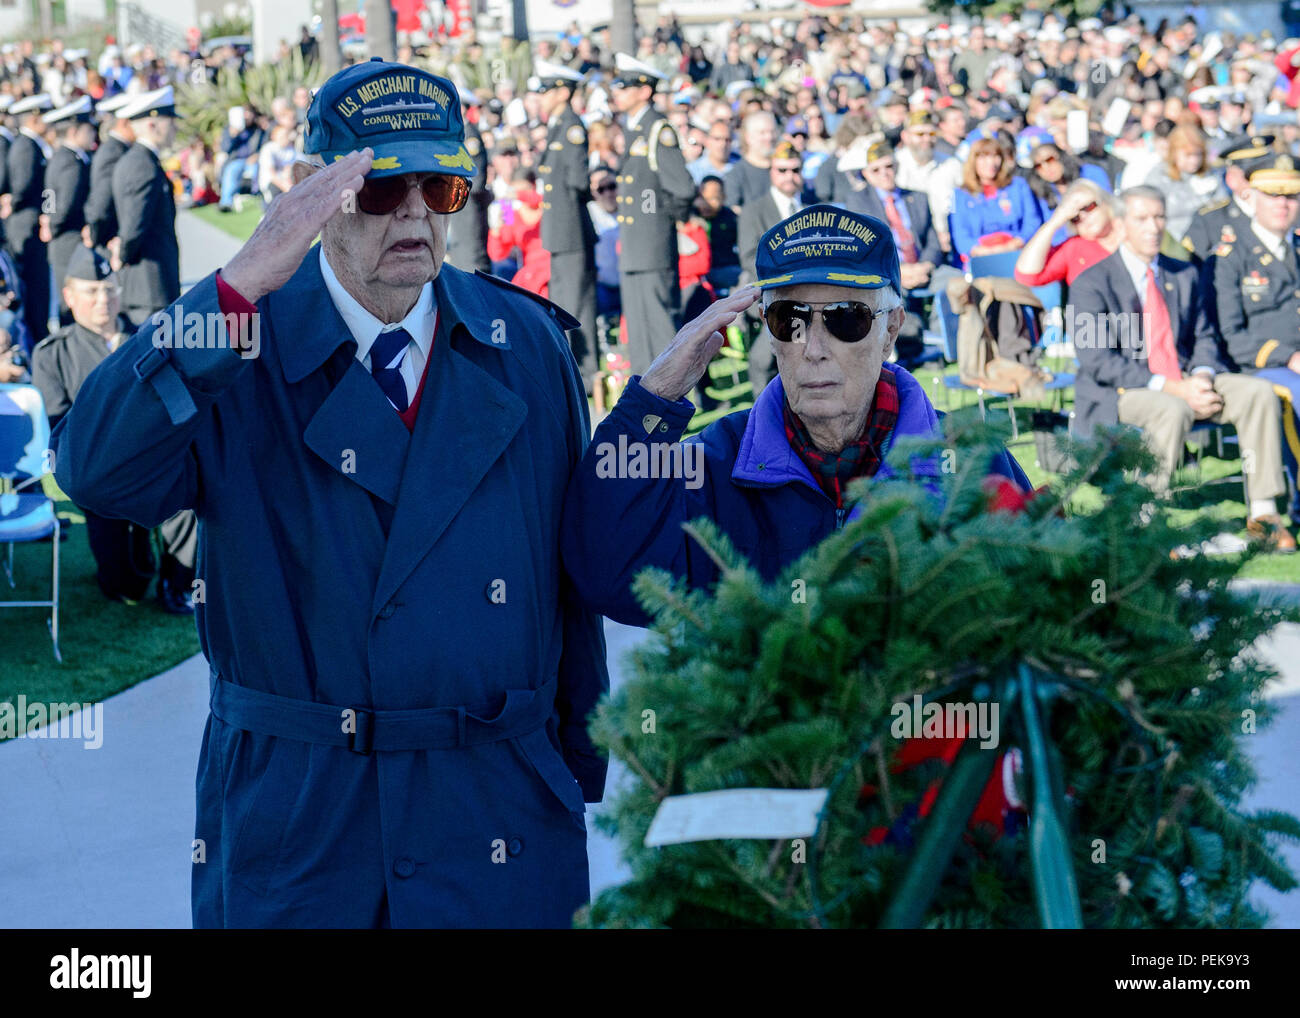 151212-N-QW941-088  SAN DIEGO (Dec. 12, 2015) World War 2 combat veterans salute to pay their respects to fallen military members during the Wreaths Across America ceremony at Fort Rosecran’s National Cemetery. Wreaths Across America is an annual event that takes place in multiple locations where volunteers lay wreaths on tombstones of fallen military members. (U.S. Navy photo by Mass Communication Specialist 3rd Class Trevor Kohlrus/Released) Stock Photo